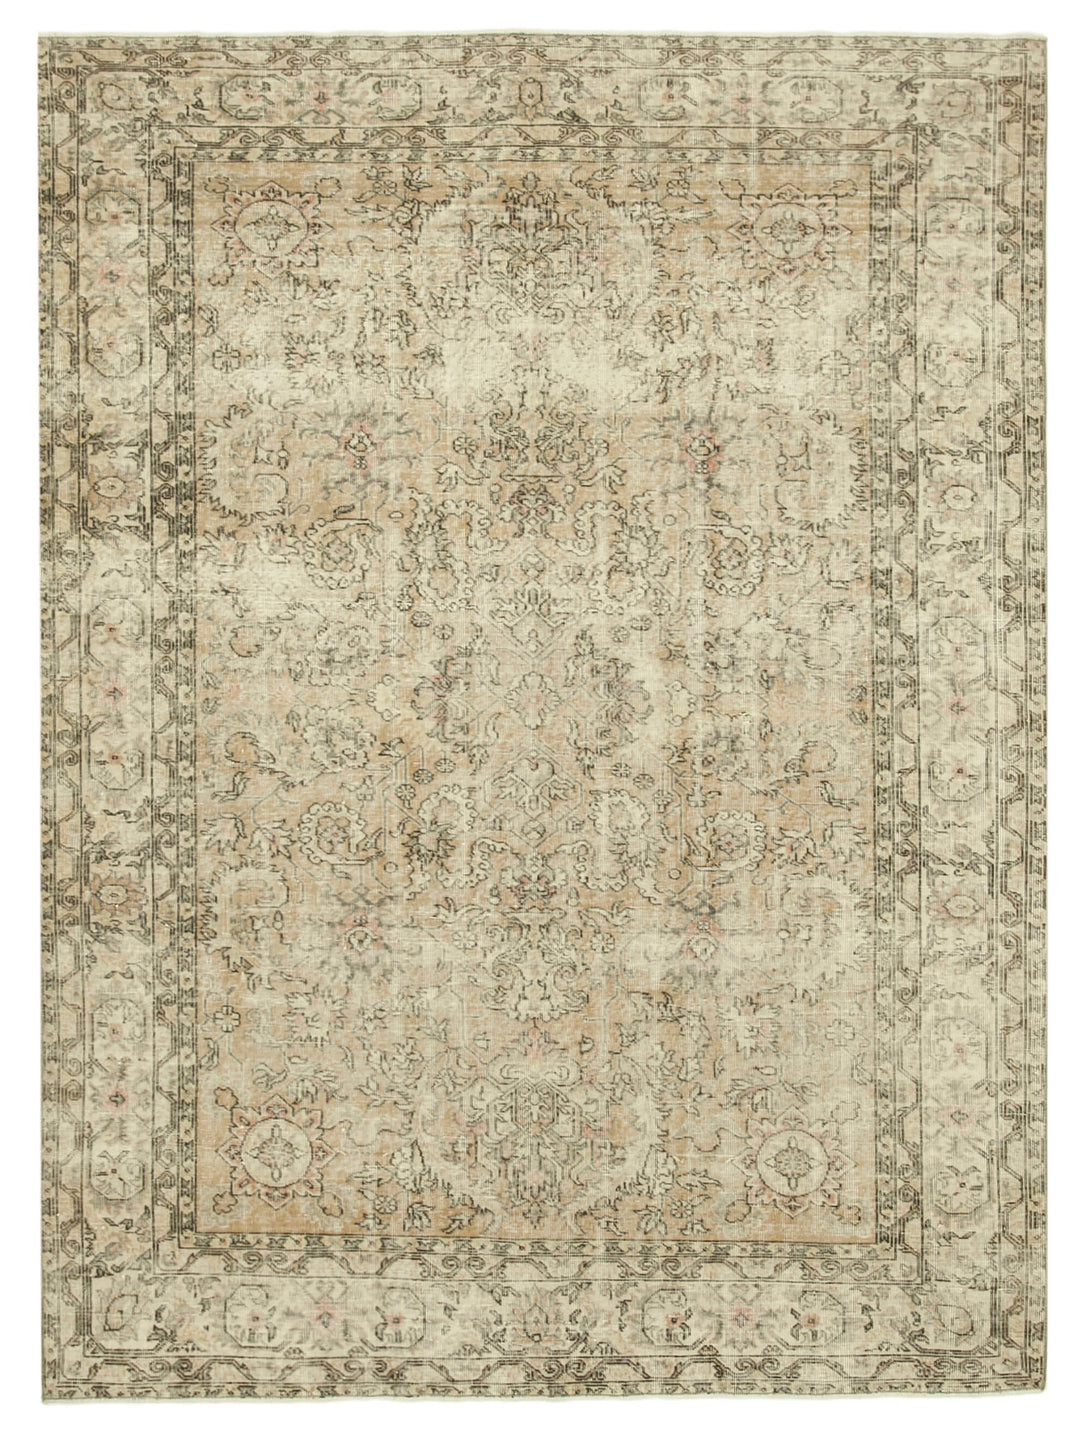 Handmade White Wash Area Rug > Design# OL-AC-39065 > Size: 6'-10" x 9'-3", Carpet Culture Rugs, Handmade Rugs, NYC Rugs, New Rugs, Shop Rugs, Rug Store, Outlet Rugs, SoHo Rugs, Rugs in USA